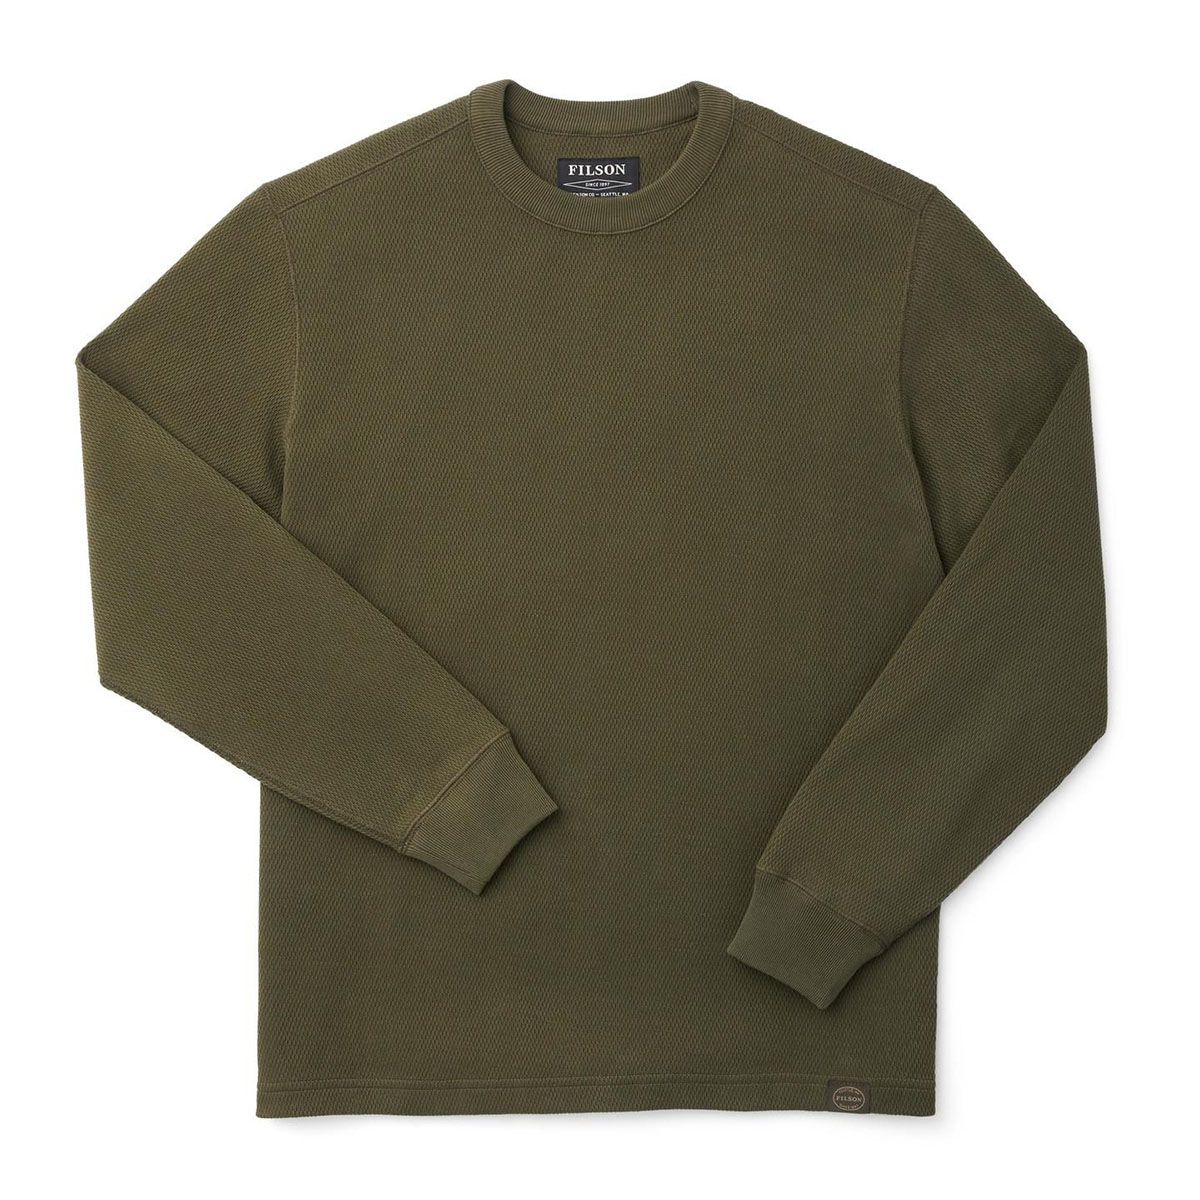 https://www.beaubags.com/media/catalog/product/cache/3/image/0dc2d03fe217f8c83829496872af24a0/f/i/filson-waffle-knit-thermal-crewneck-shirt-20067706-mossy-rock-front.jpg